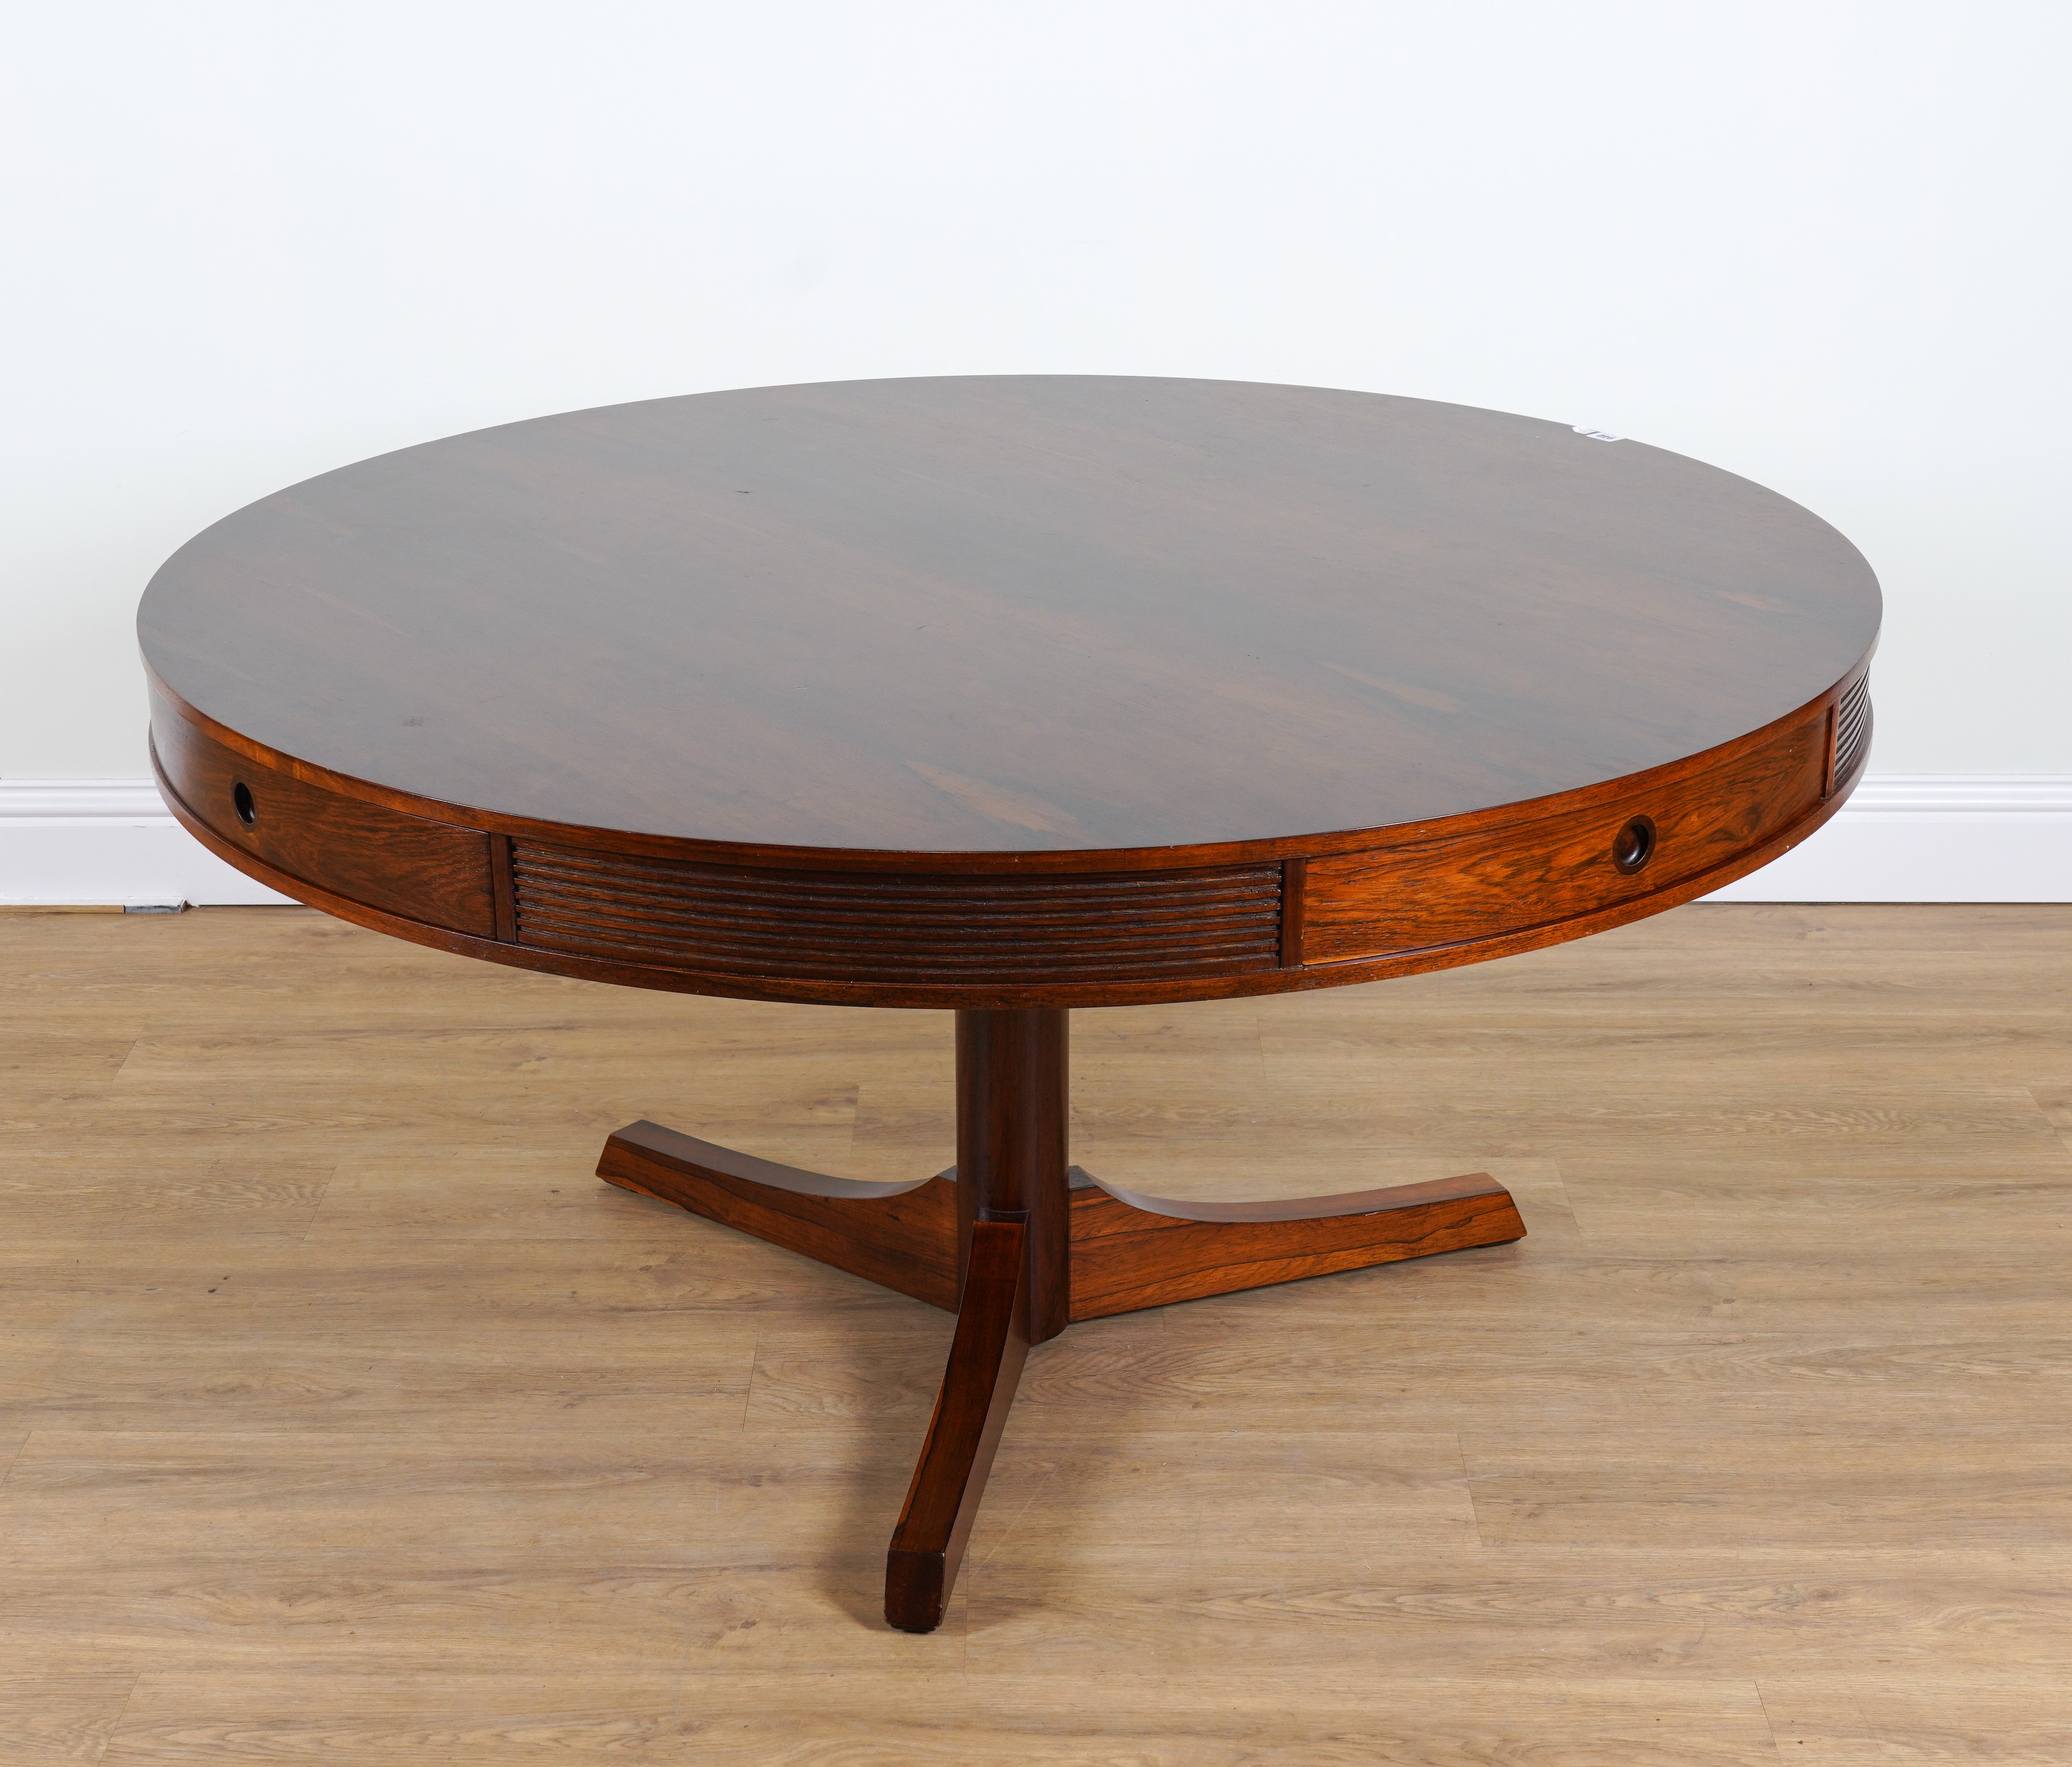 ARCHIE SHINE FOR HEALS FURNITURE; A MID 20TH CENTURY ROSEWOOD CIRCULAR DINING TABLE - Image 5 of 7